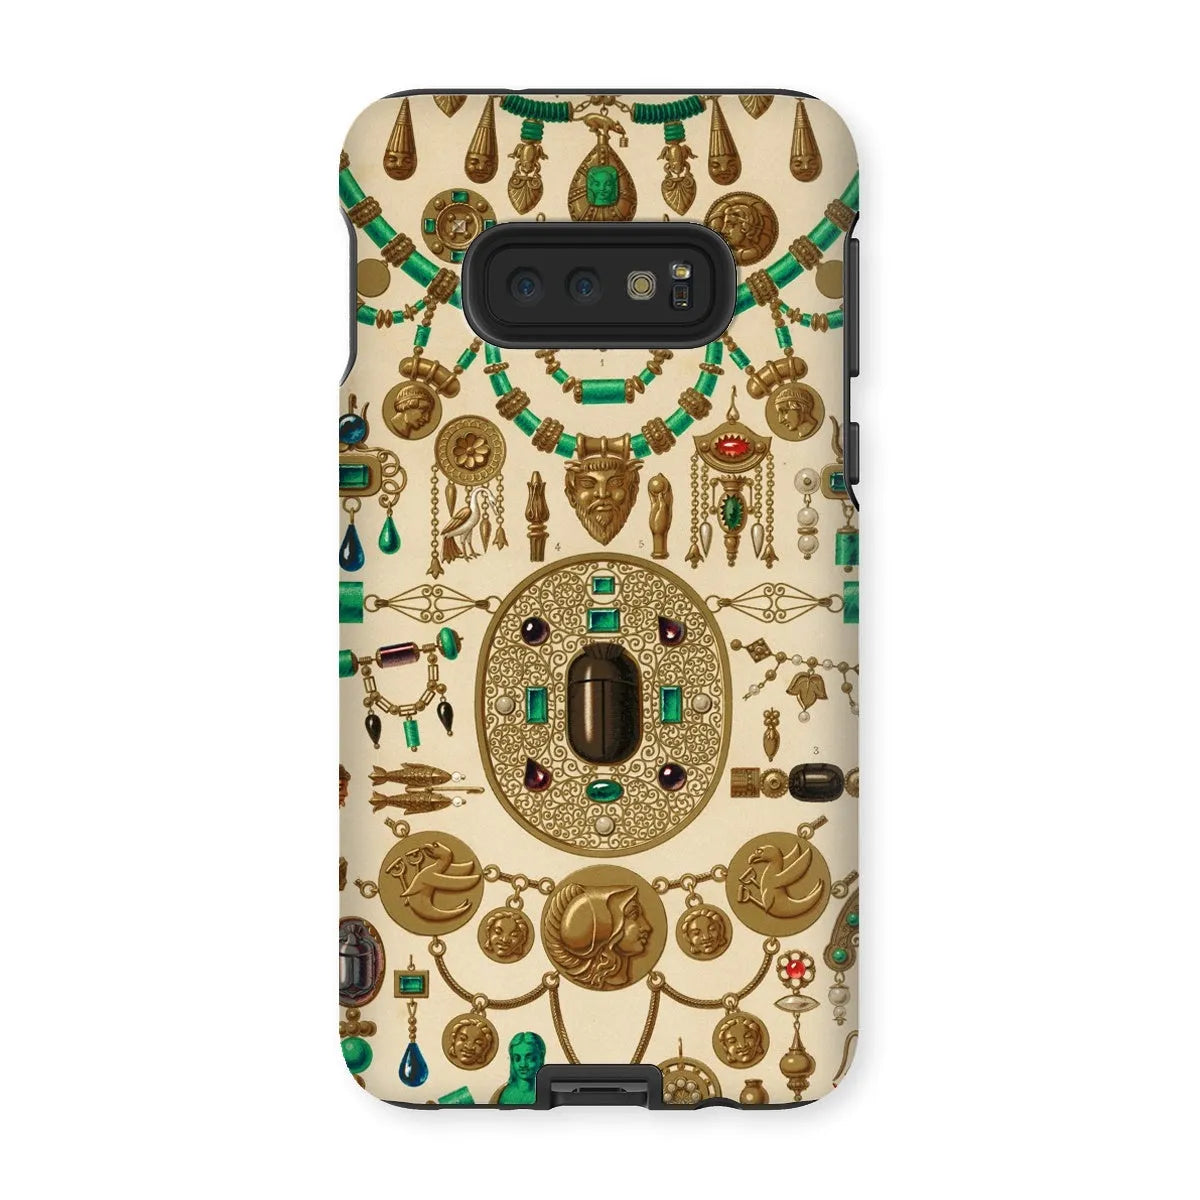 Etruscan Jewelry By Auguste Racinet Art Phone Case - Samsung Galaxy S10e / Matte - Mobile Phone Cases - Aesthetic Art